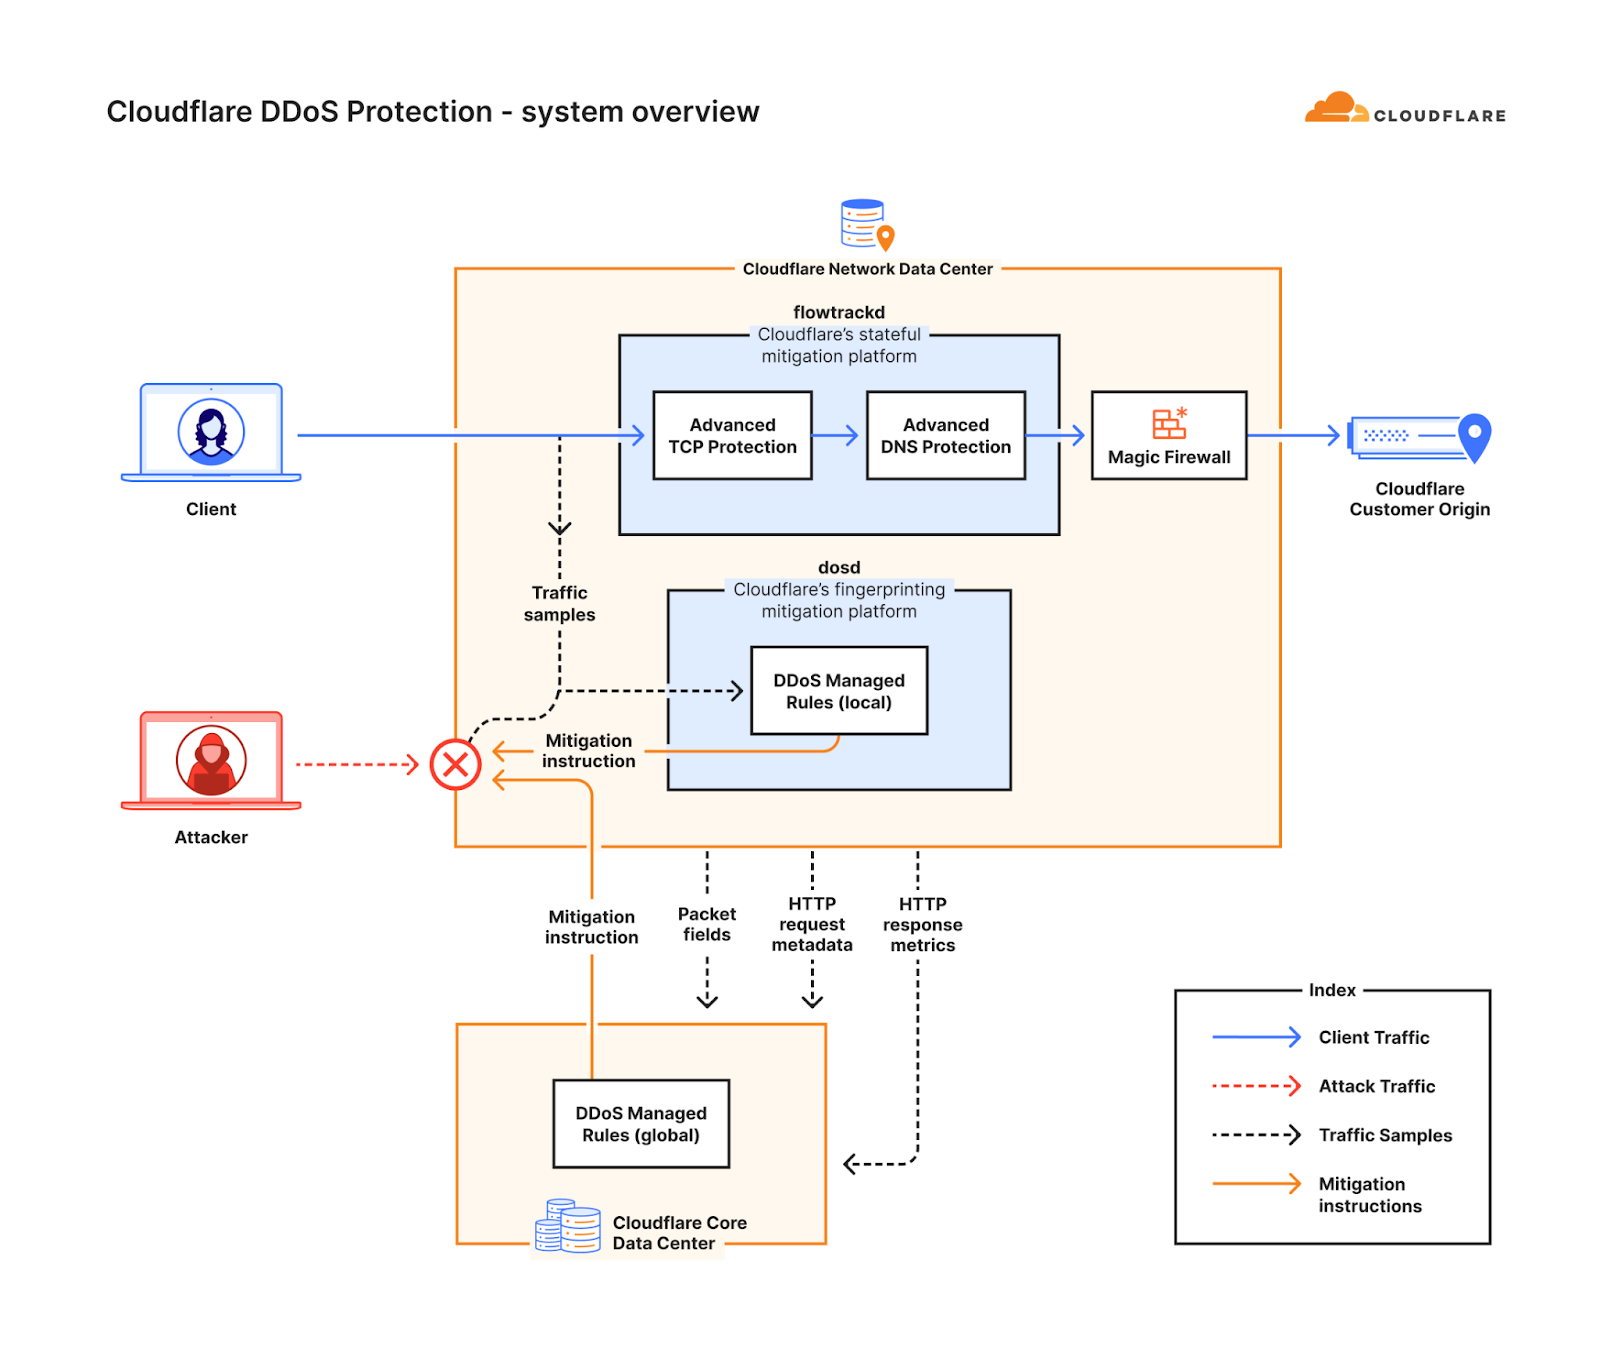 Diagram of Cloudflare’s DDoS protection systems